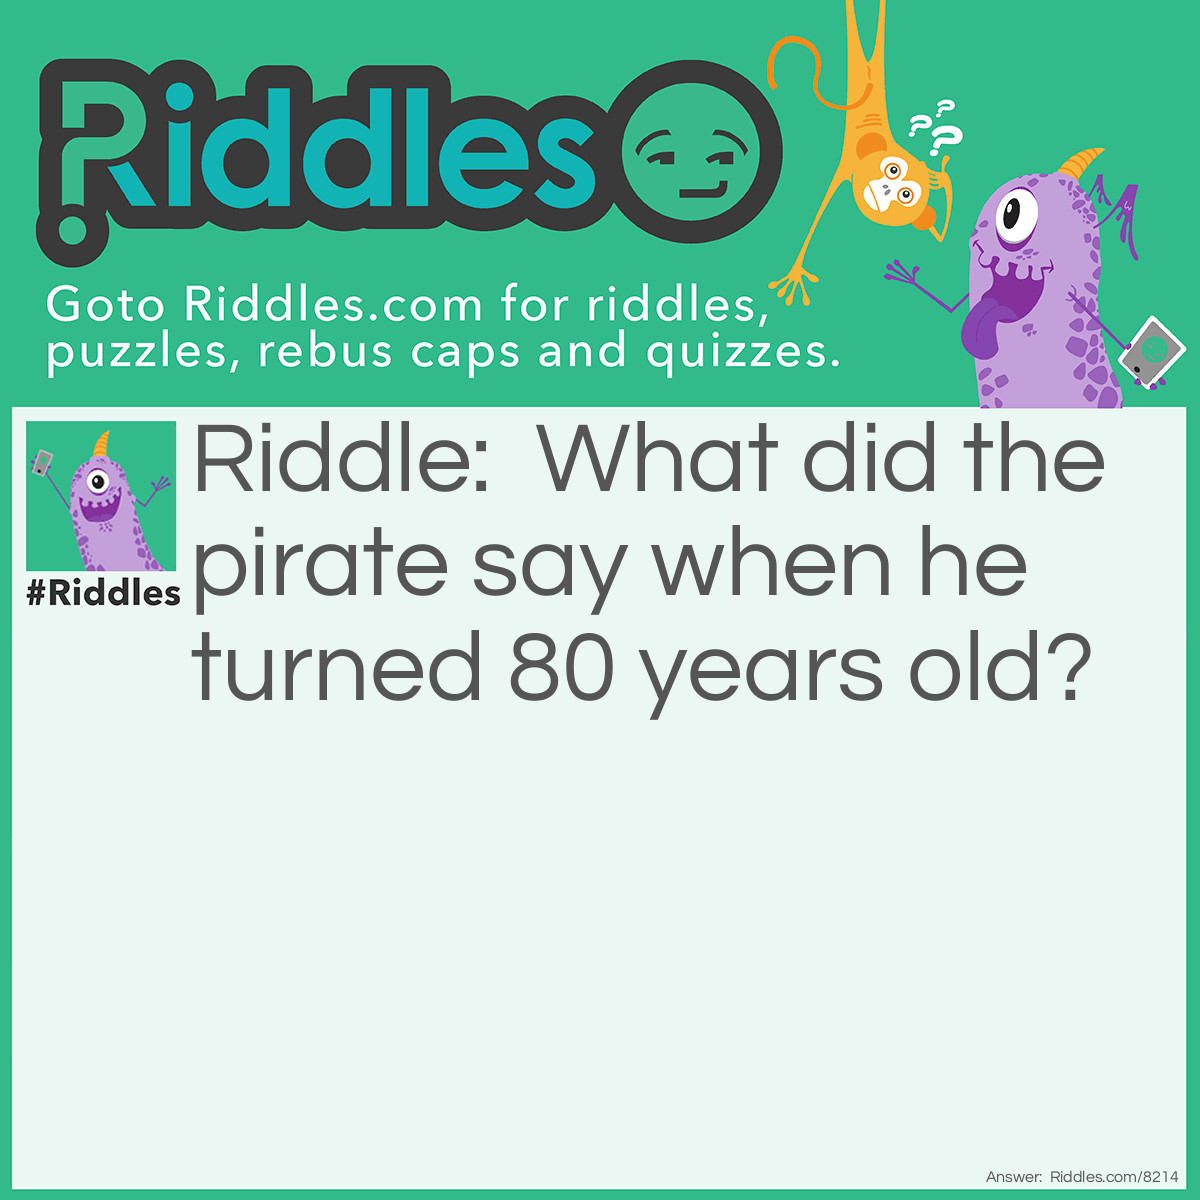 Riddle: What did the pirate say when he turned 80 years old? Answer: Aye matey.